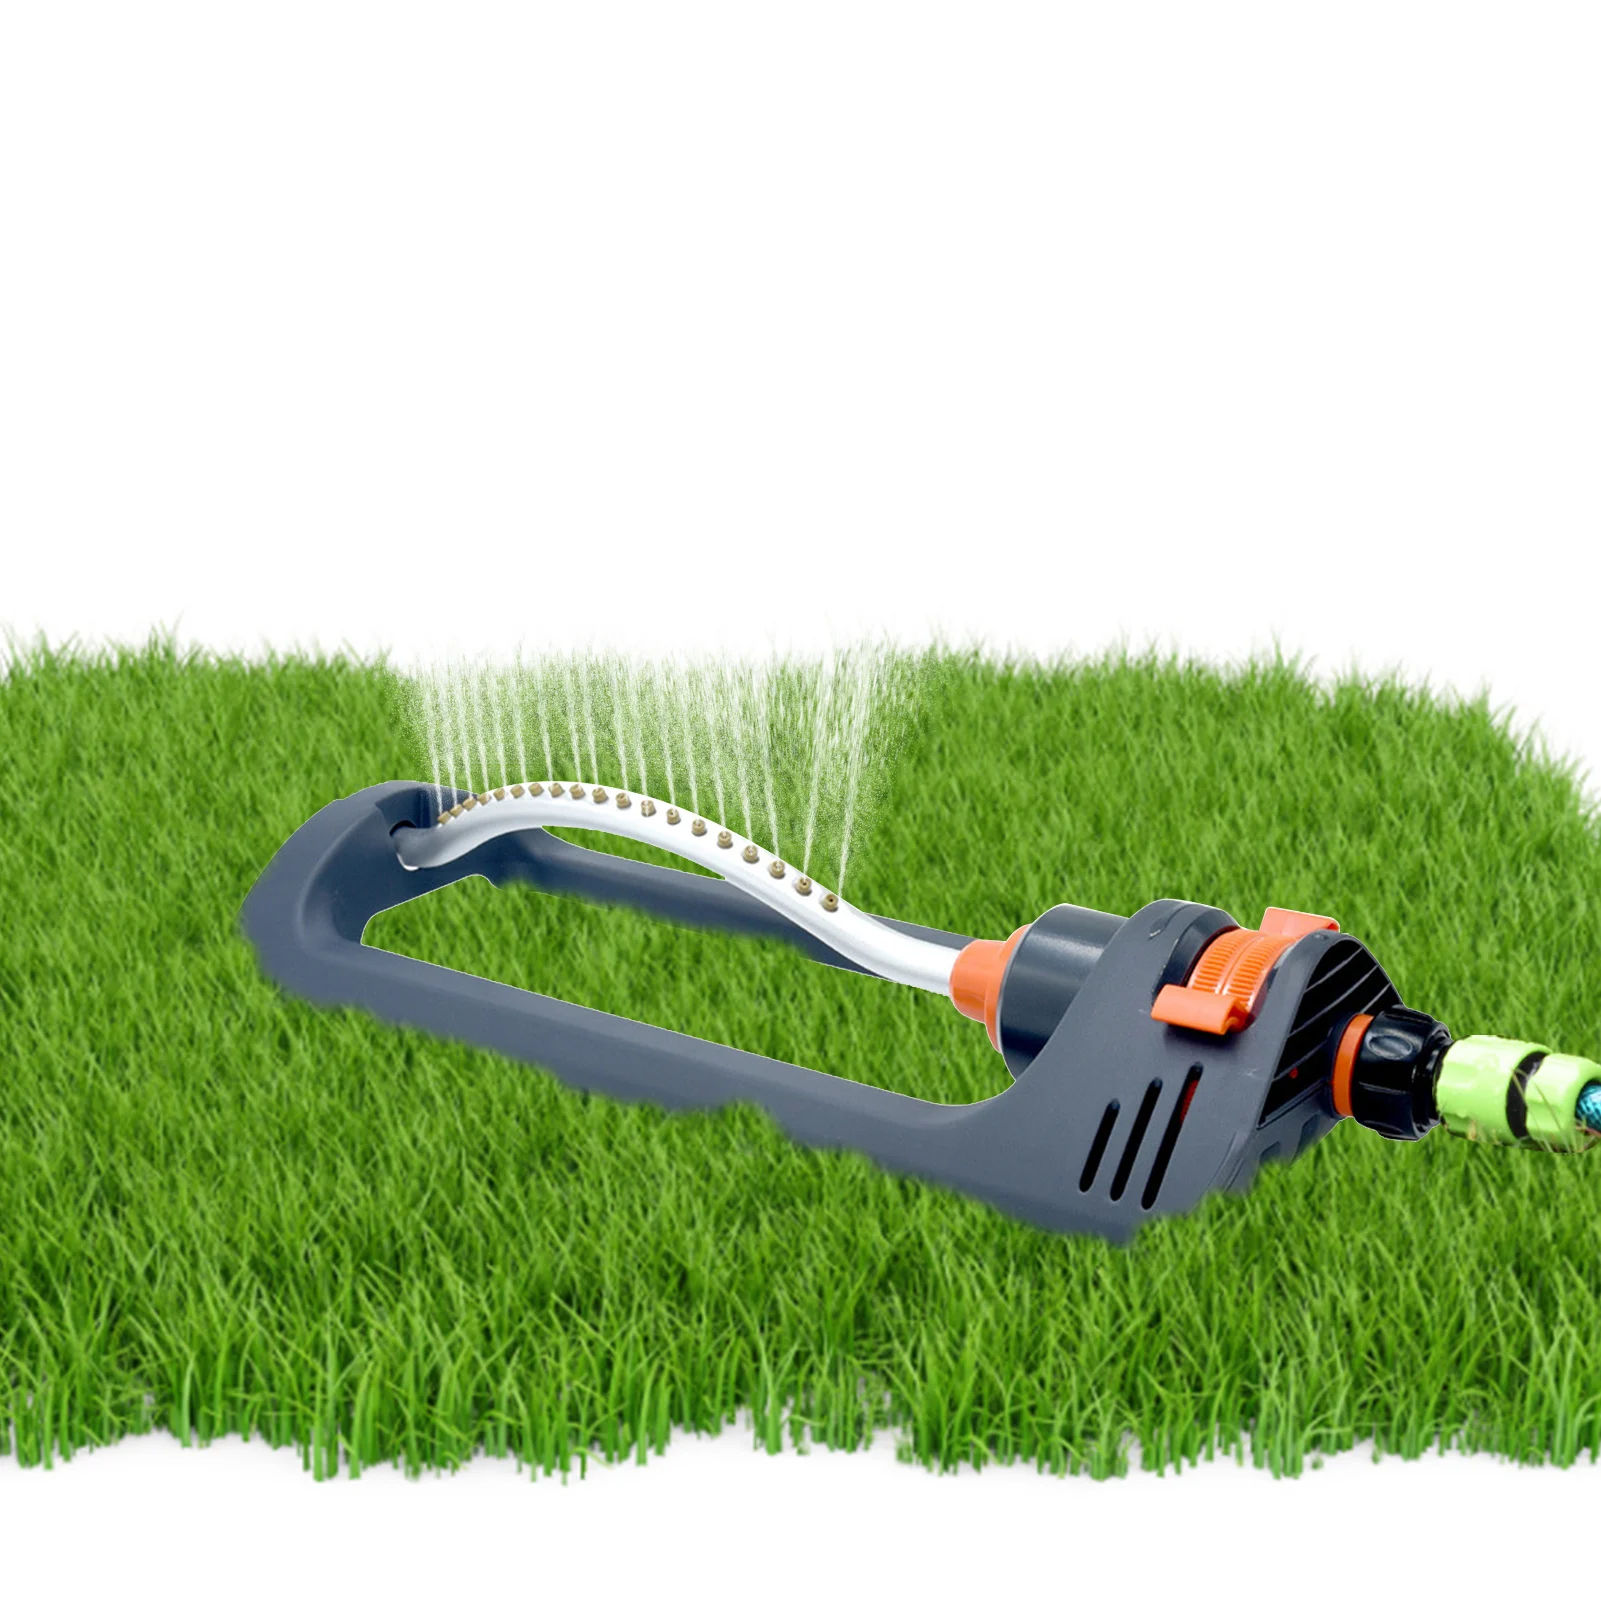 

Garden Swing Sprinkler Yard Large Area Irrigation Oscillating Adjustable Lawn Park Watering System Accessories Easy Connection